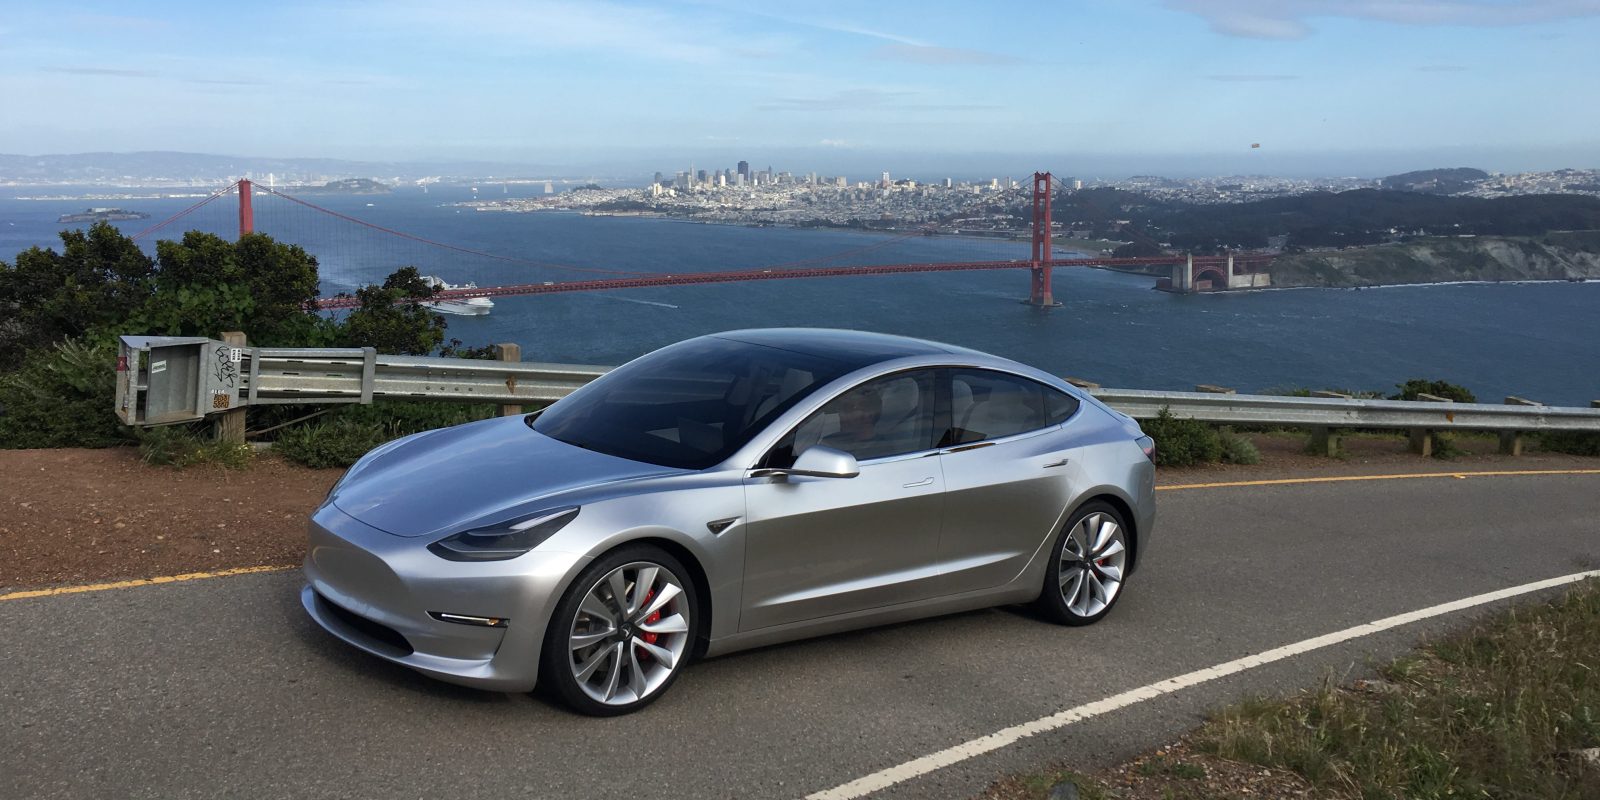 Tesla Model 3 Will Have Supercharger Access But As An Optional Package Says Musk Electrek